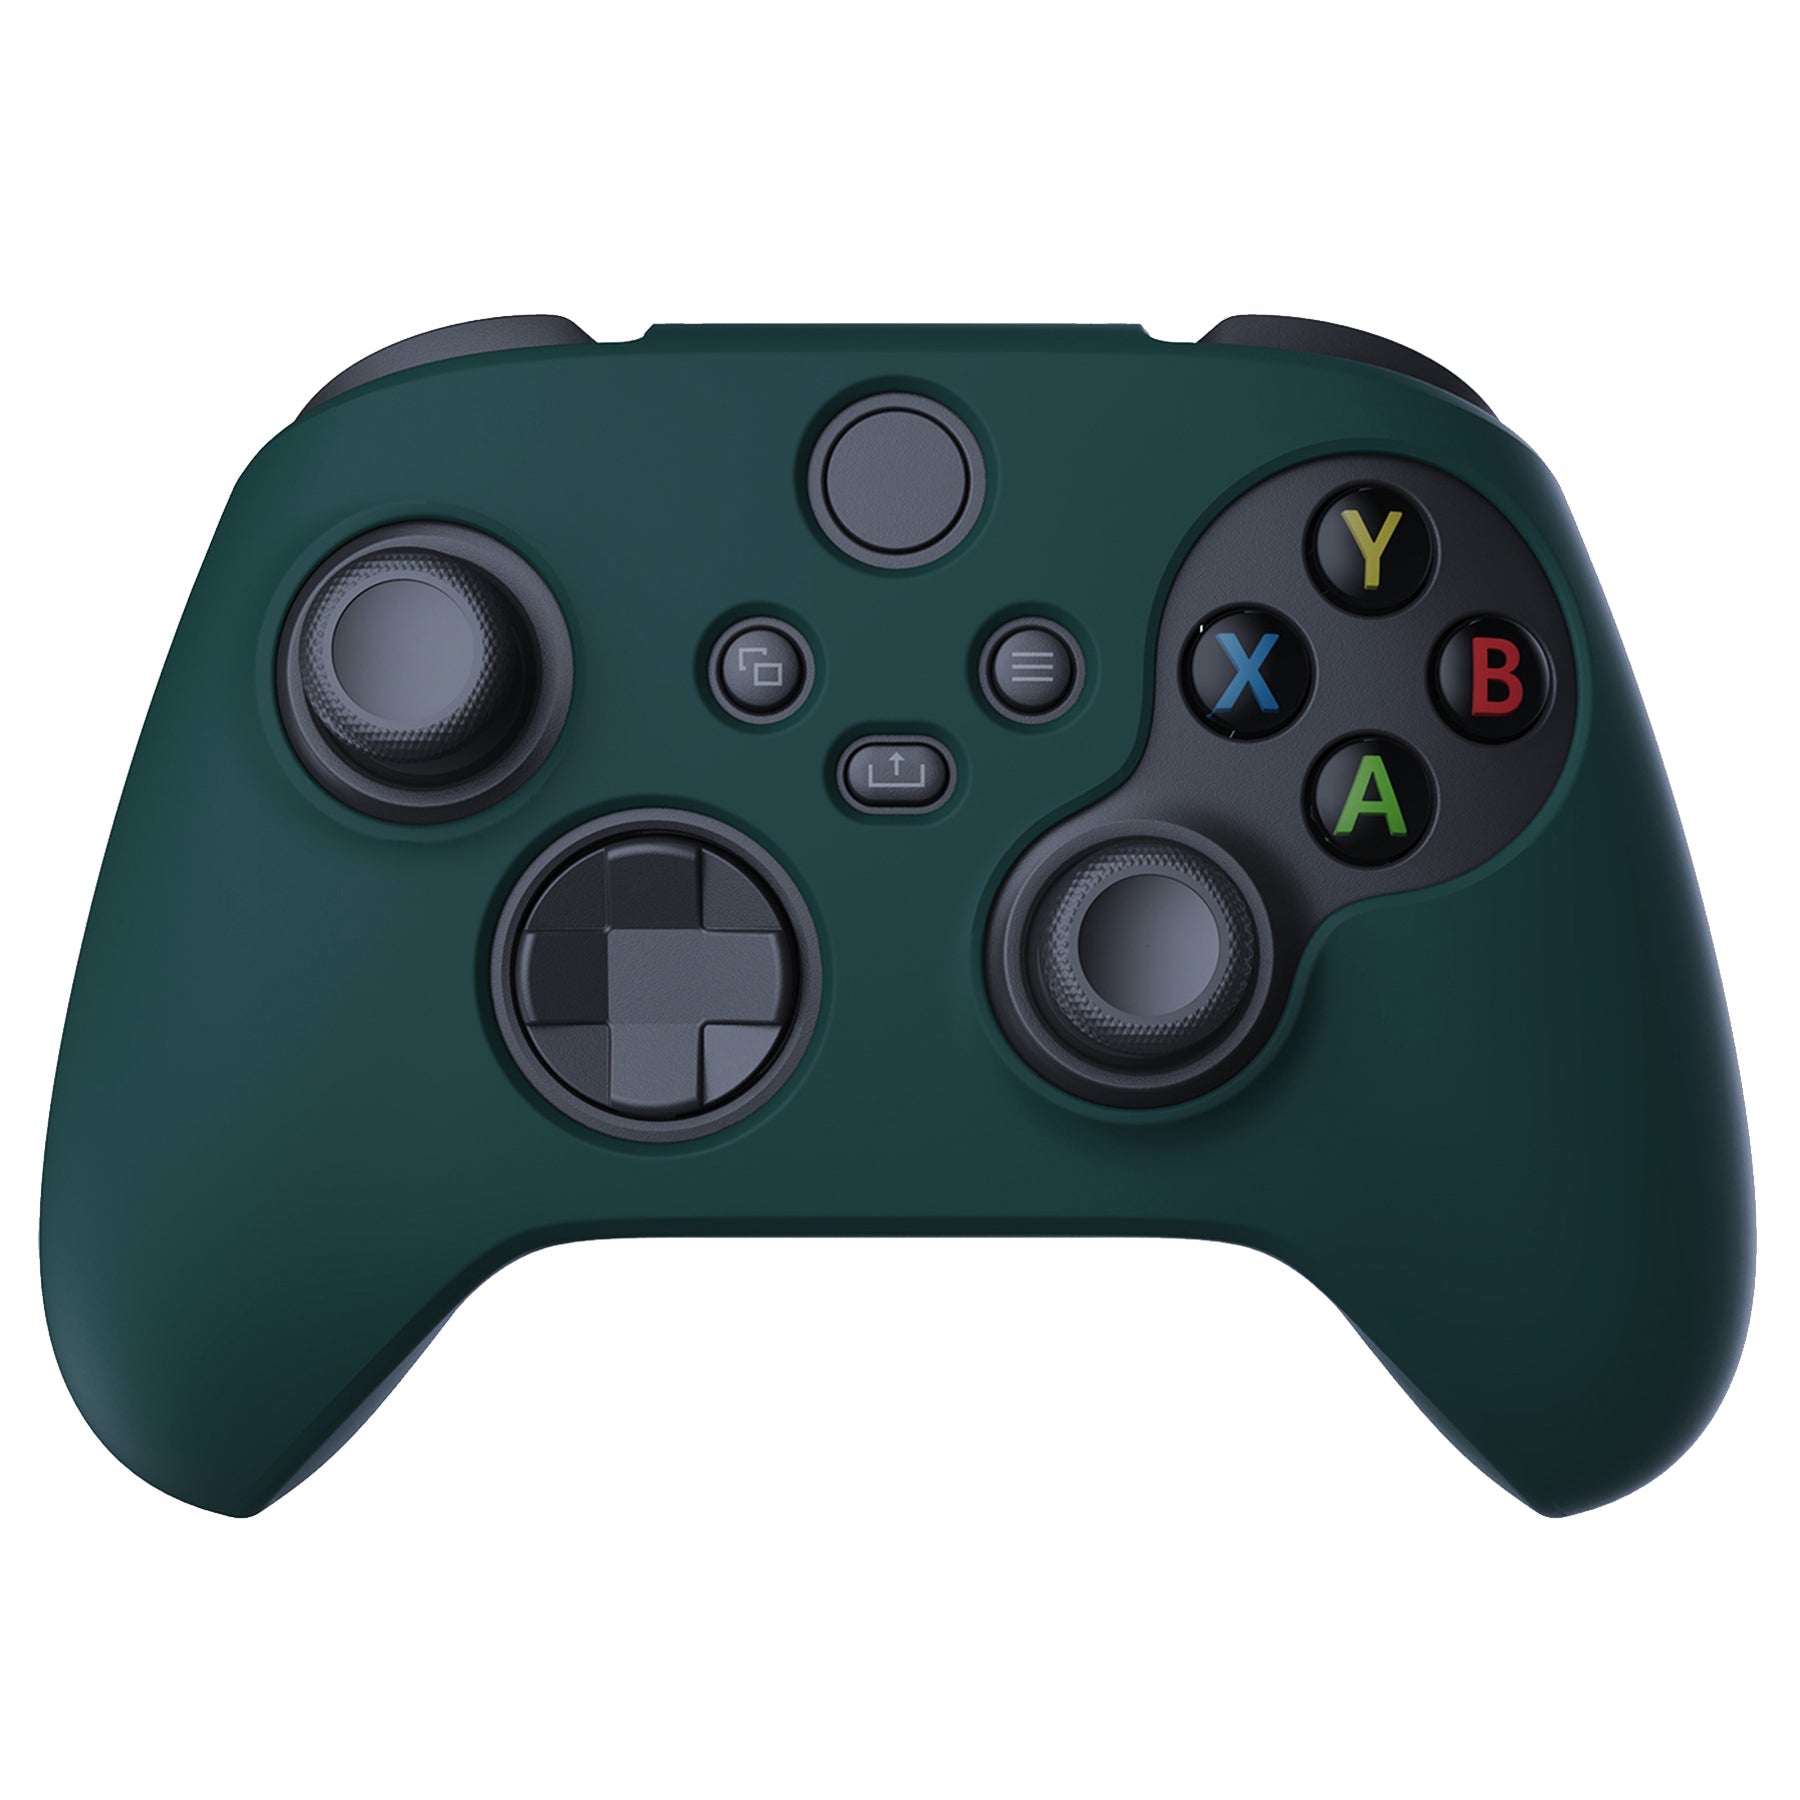 PlayVital Racing Green Pure Series Anti-Slip Silicone Cover Skin for Xbox Series X Controller, Soft Rubber Case Protector for Xbox Series S Controller with Black Thumb Grip Caps - BLX3004 PlayVital